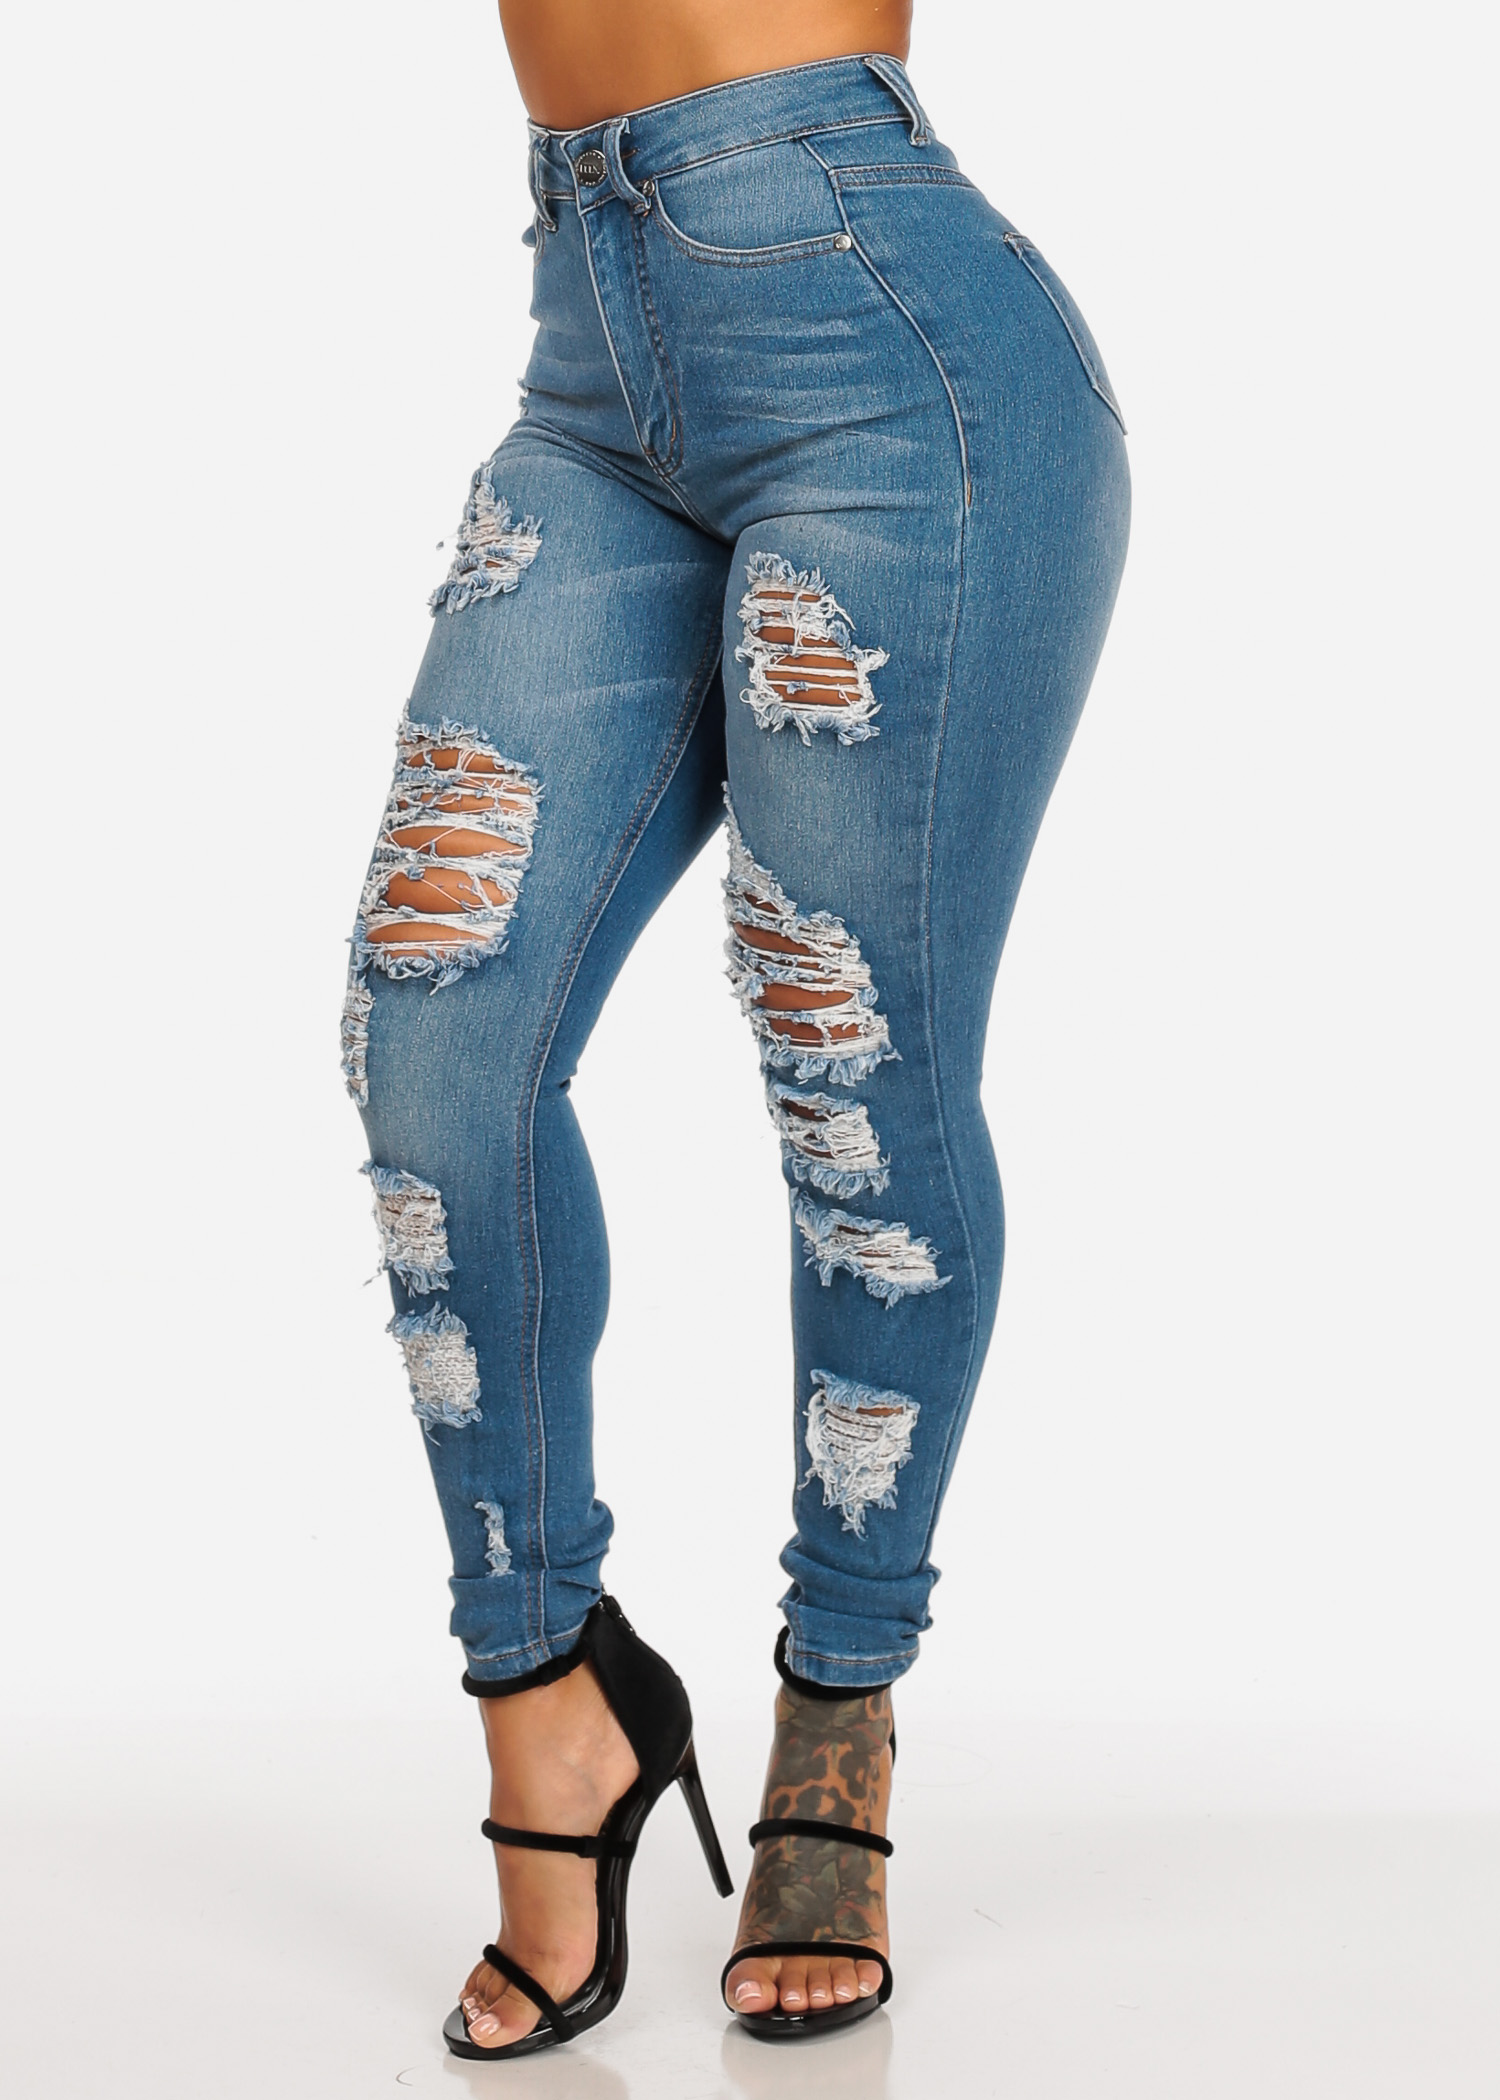 Womens Juniors Women's Junior Ladies Casual Sexy Ultra High Waisted Light Wash Distressed Ripped 1 Button Stretchy Skinny Jeans 10583W - image 1 of 4